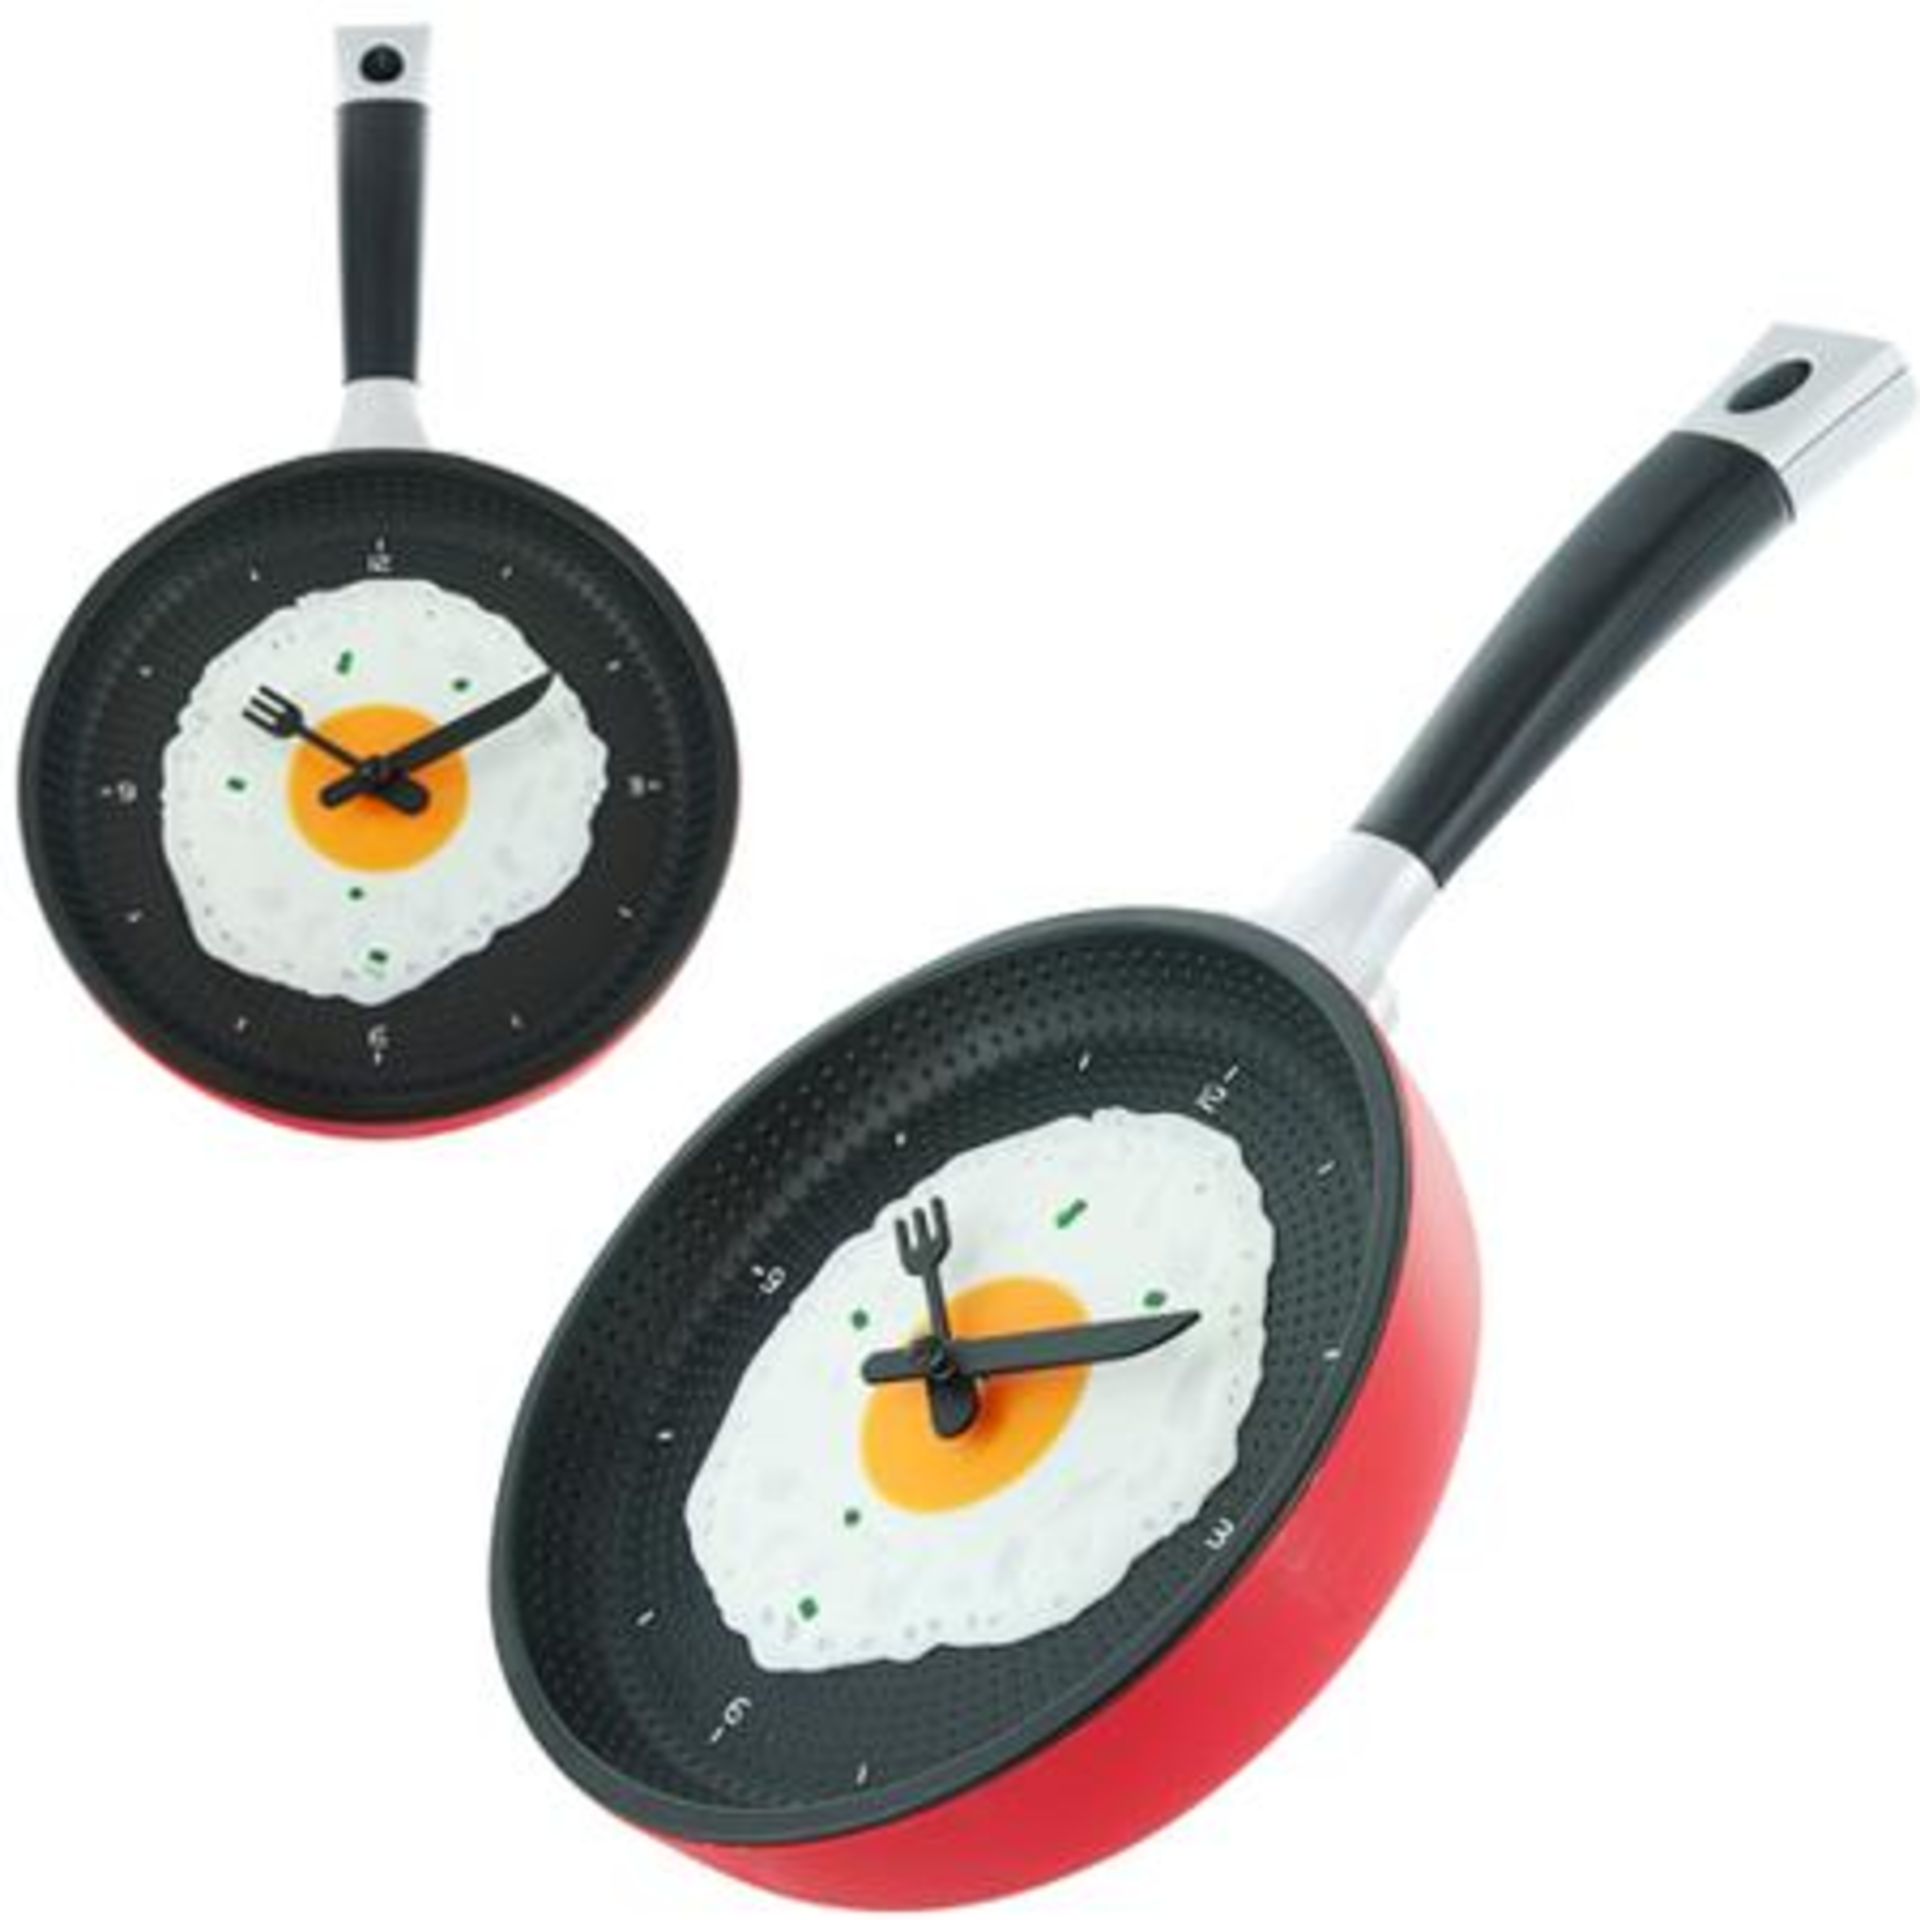 + VAT Brand New Frying Pan Wall Clock (Colour may vary) - Image 2 of 2